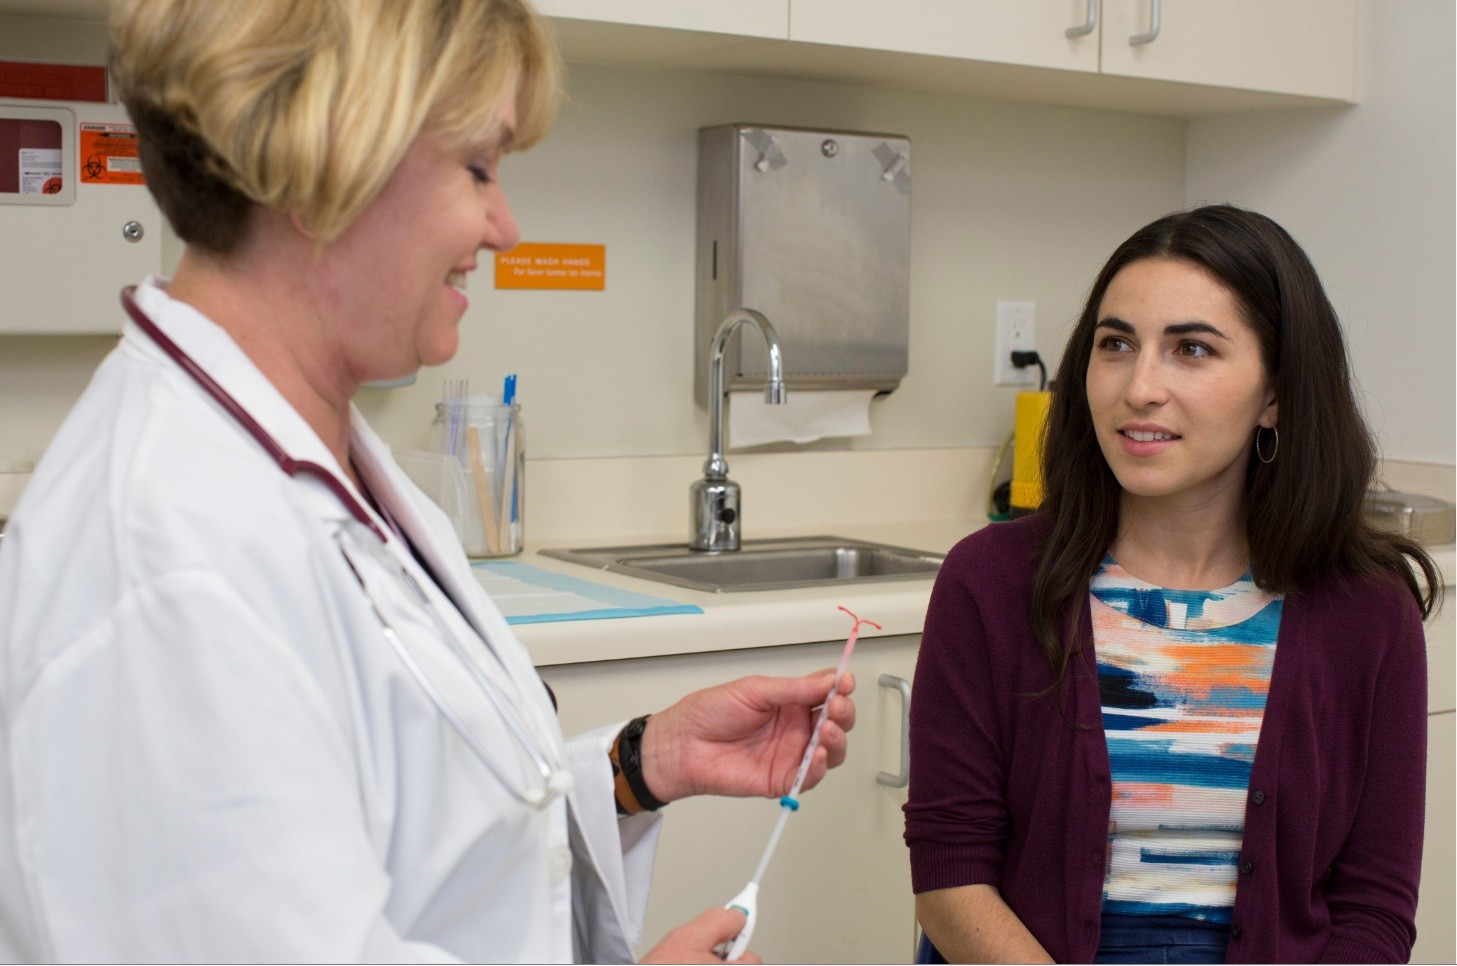 Planned Parenthood of Nassau County offers patient consultations about intrauterine devices and other types of LARCs.